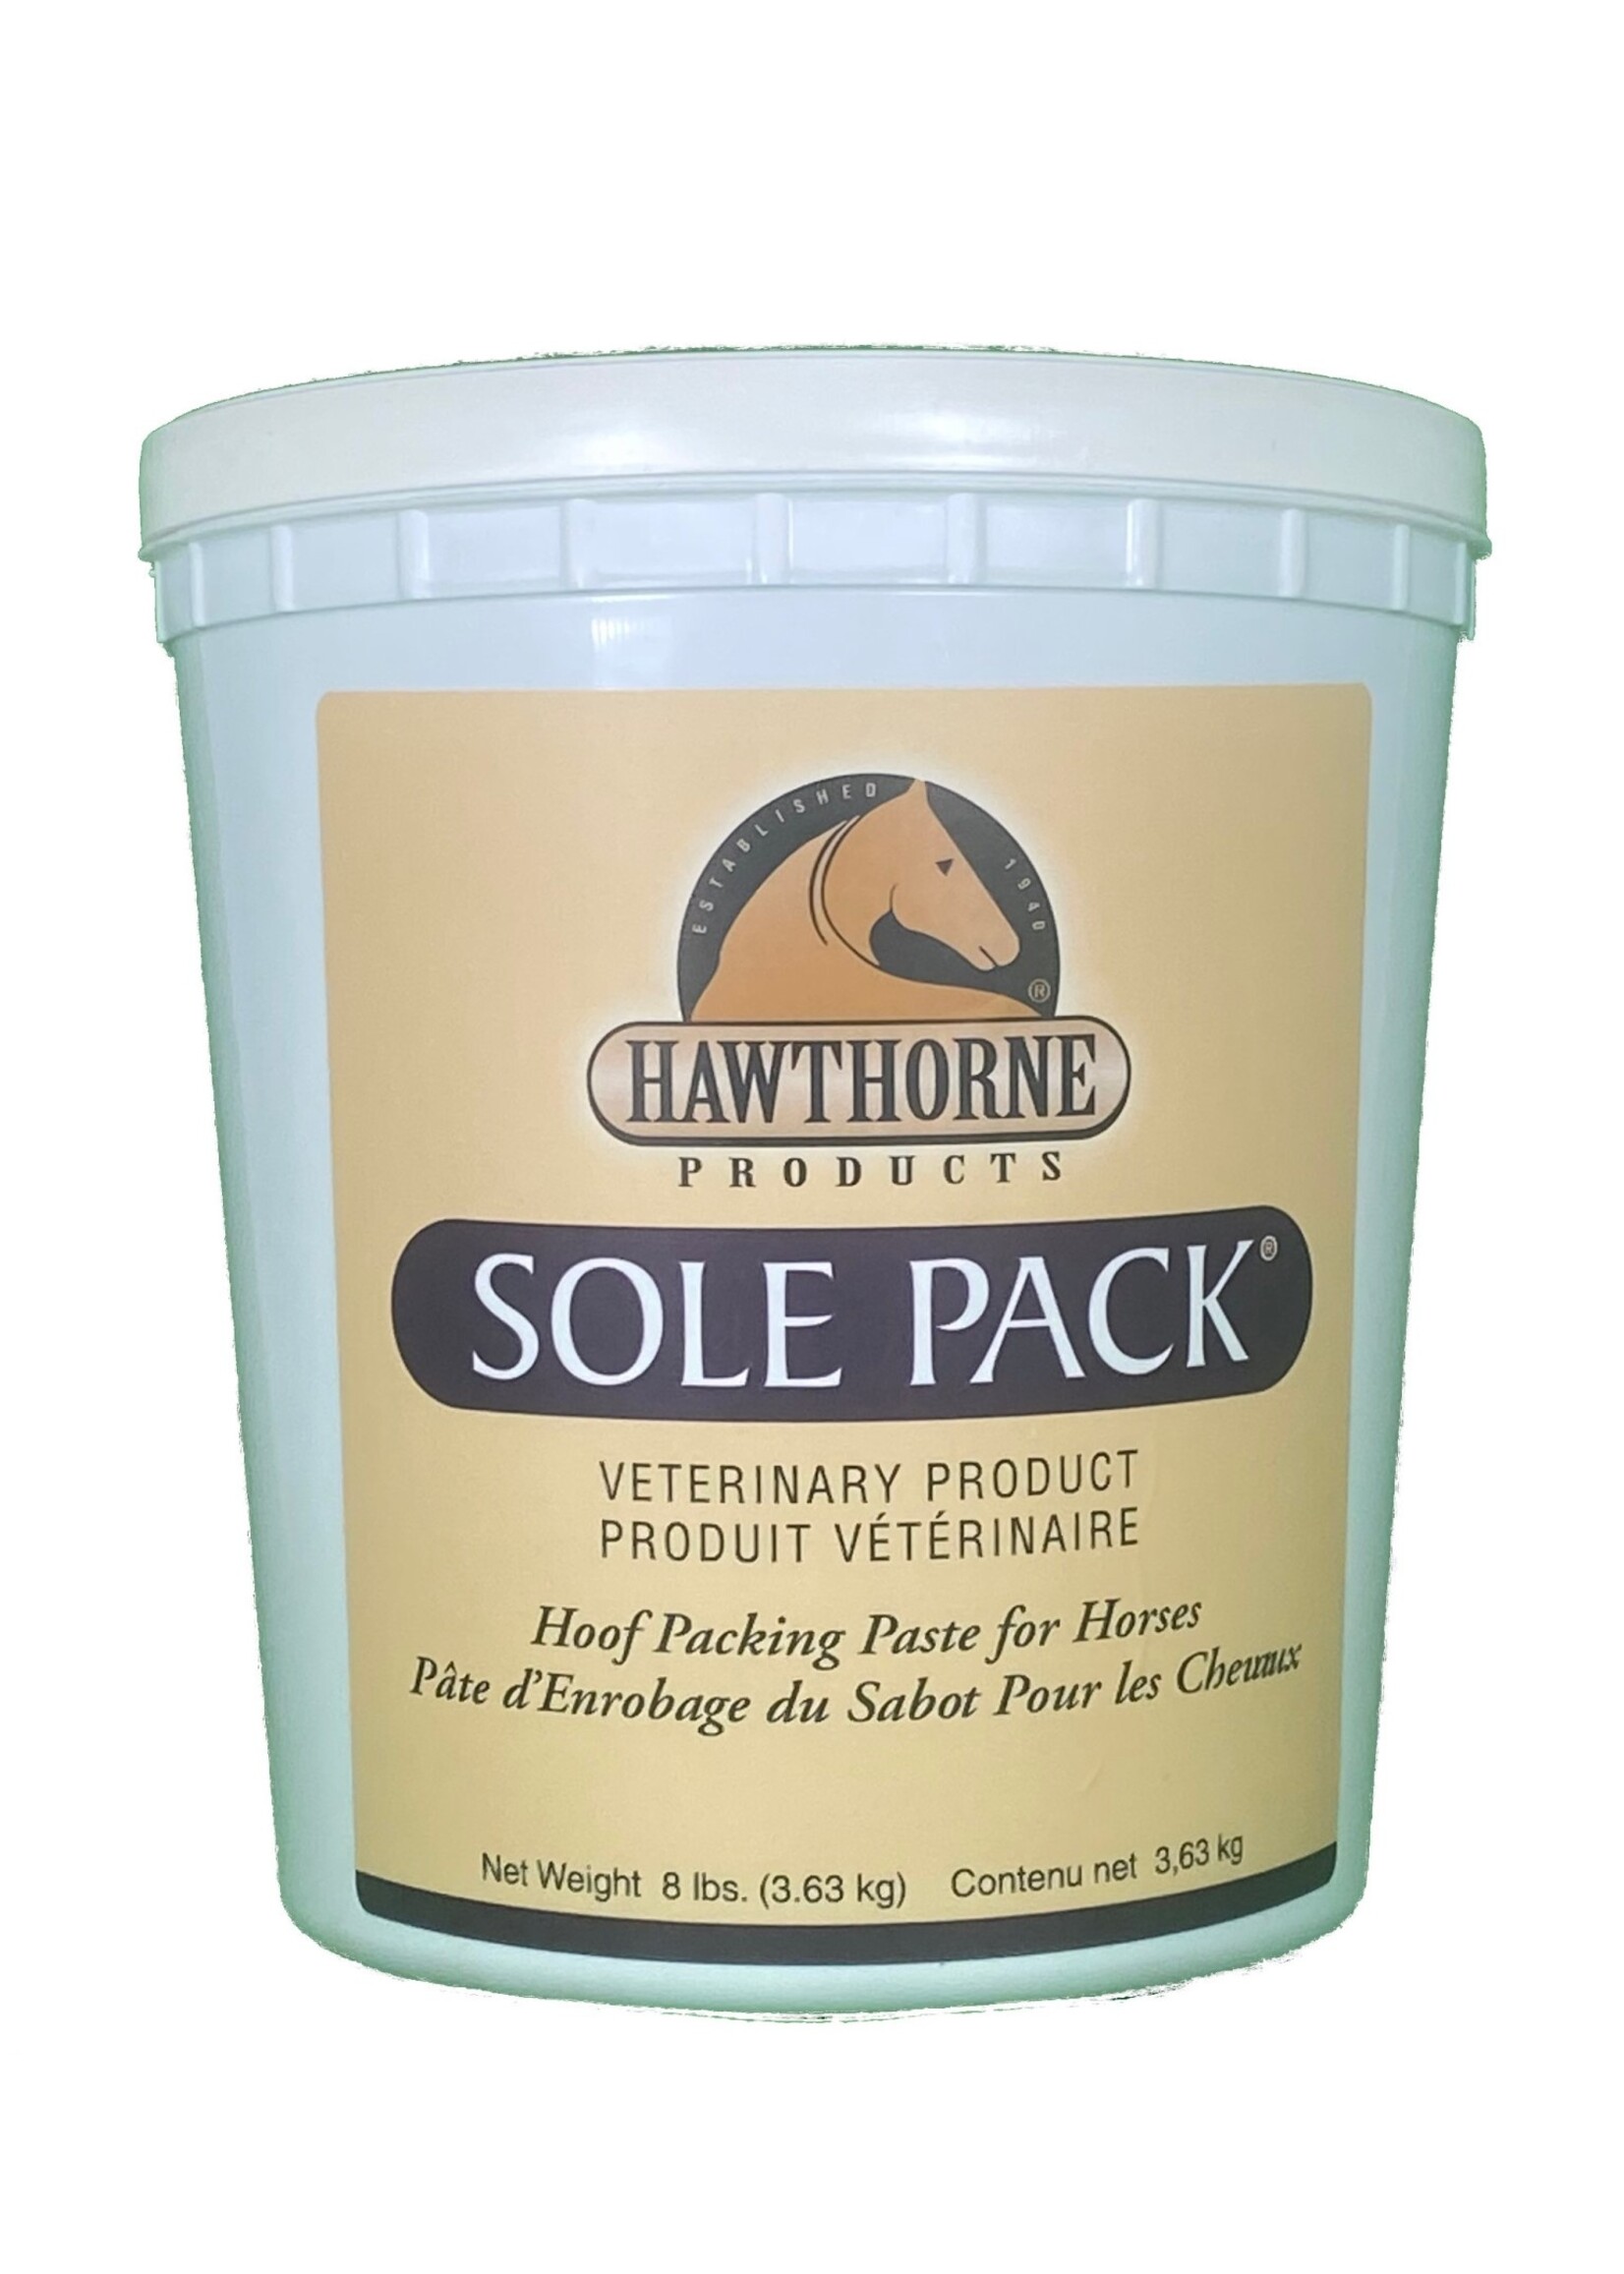 Sole Pack Sole pack 8lb bucket